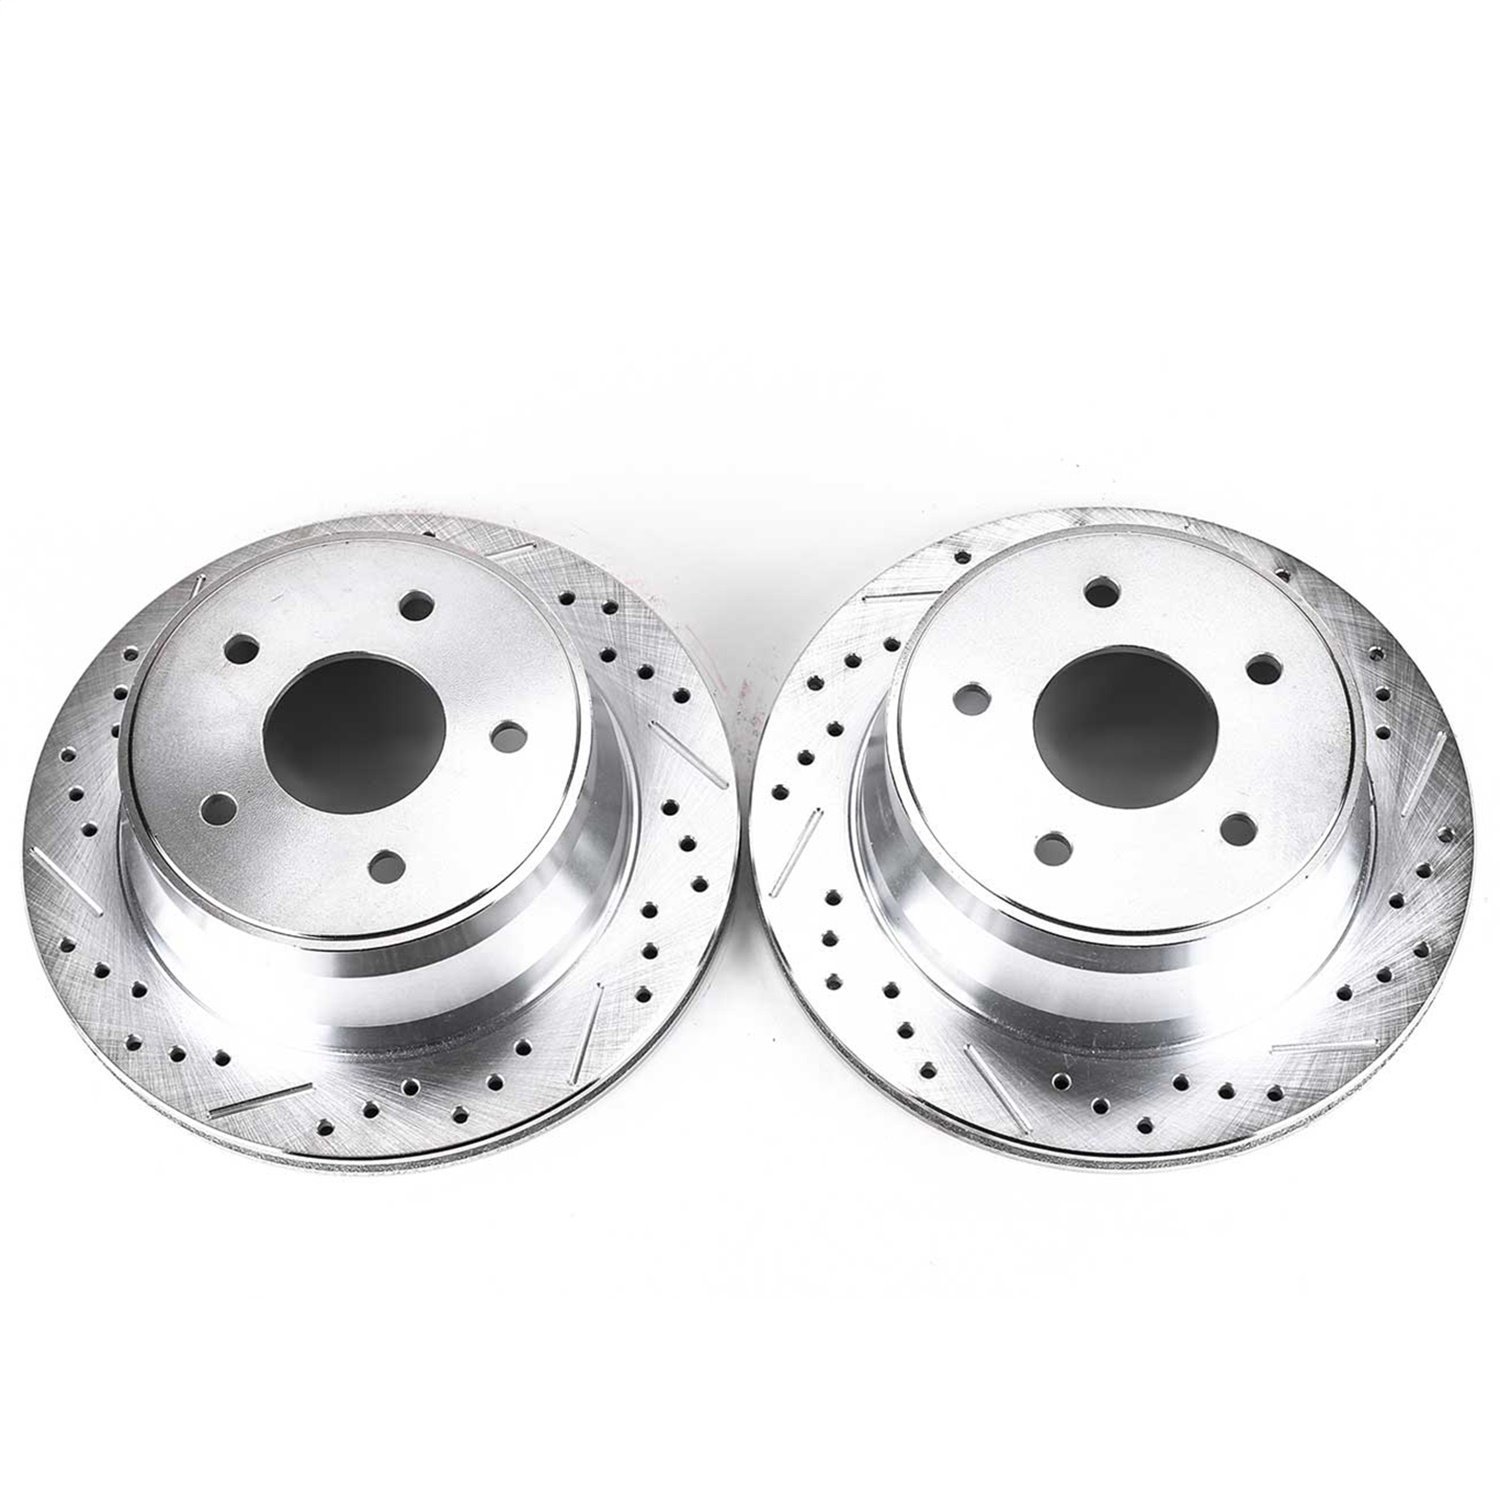 Drilled And Slotted Rear Brake Rotors Fits Select 1996-2005 Chevrolet, GMC, Isuzu, Oldsmobile Models